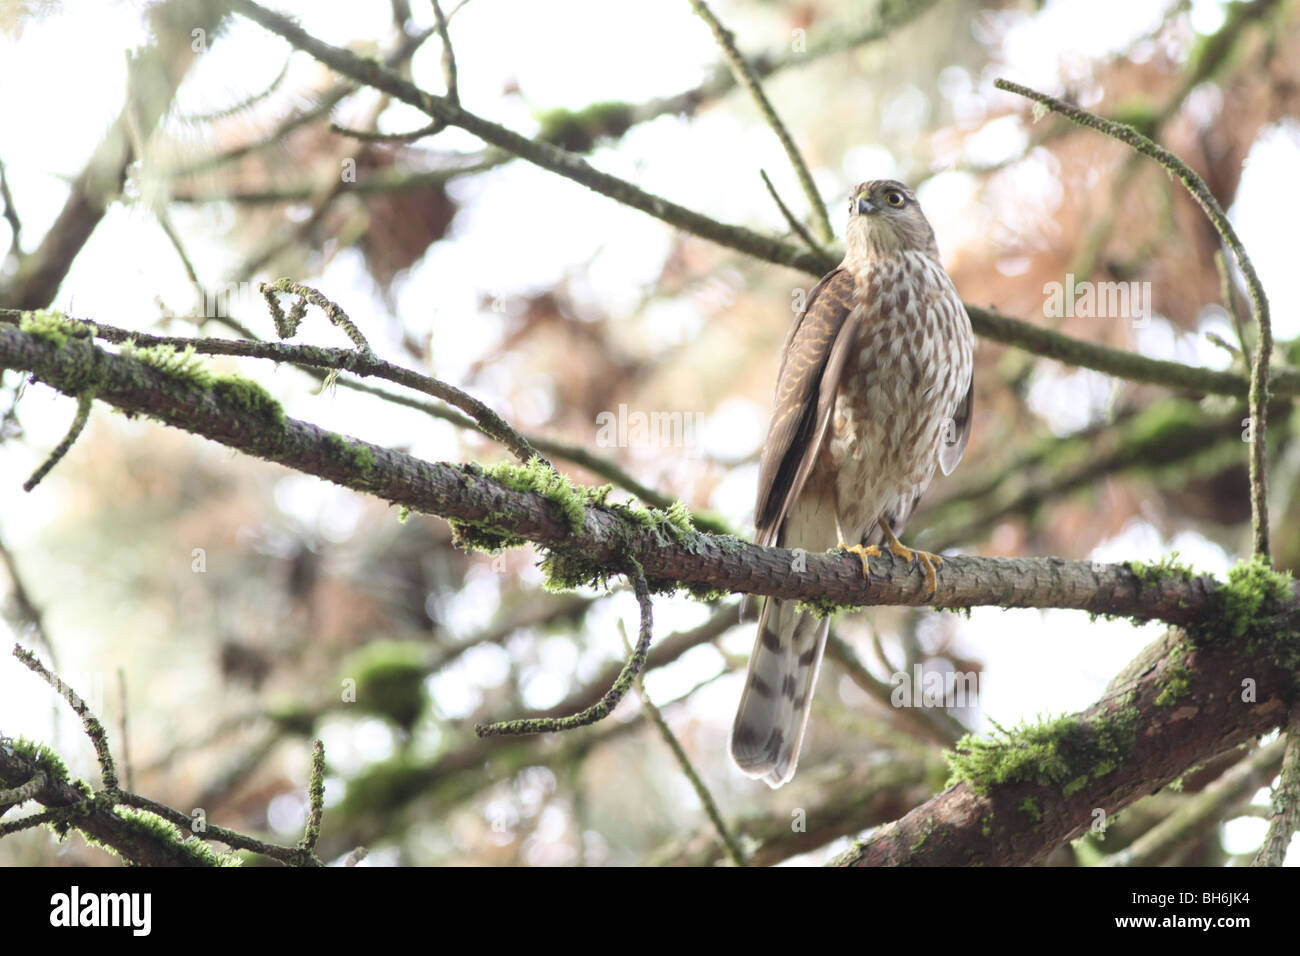 Juvenile Coopers Hawk in an Oregon forest Stock Photo